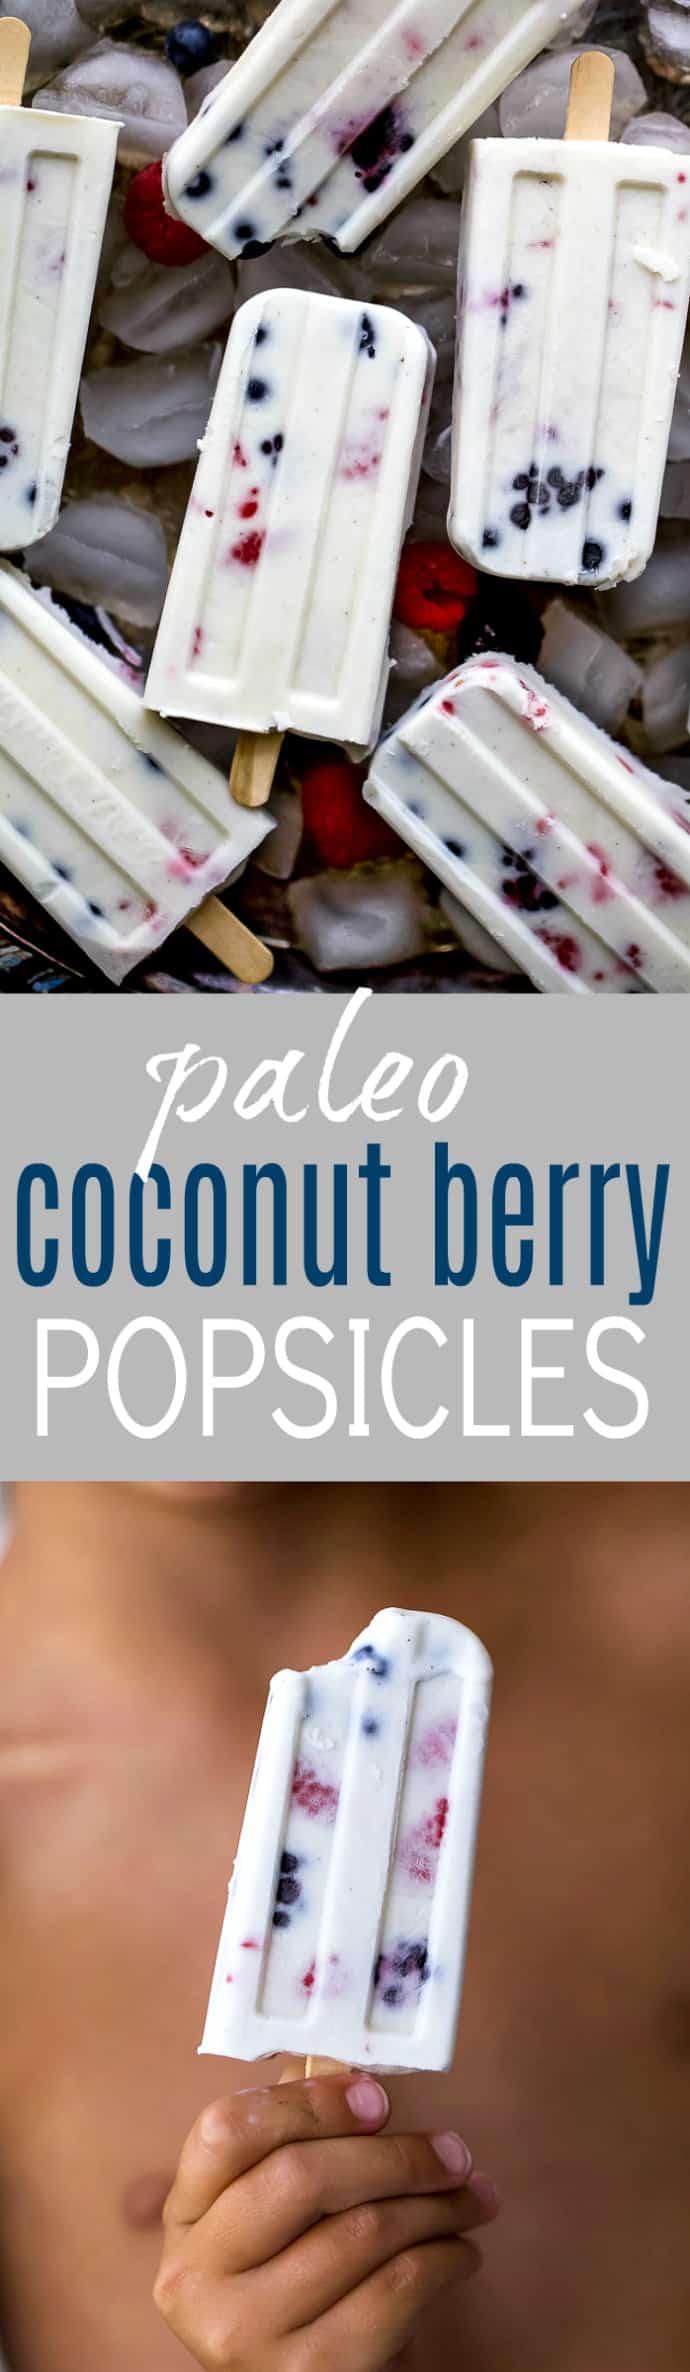 Paleo Berry Coconut Popsicles a sweet refreshing summer treat that's easy to make! These creamy Coconut Popsicles are filled with tart berries and finished with a vanilla bean coconut mixture. They'll be a hit all summer long!